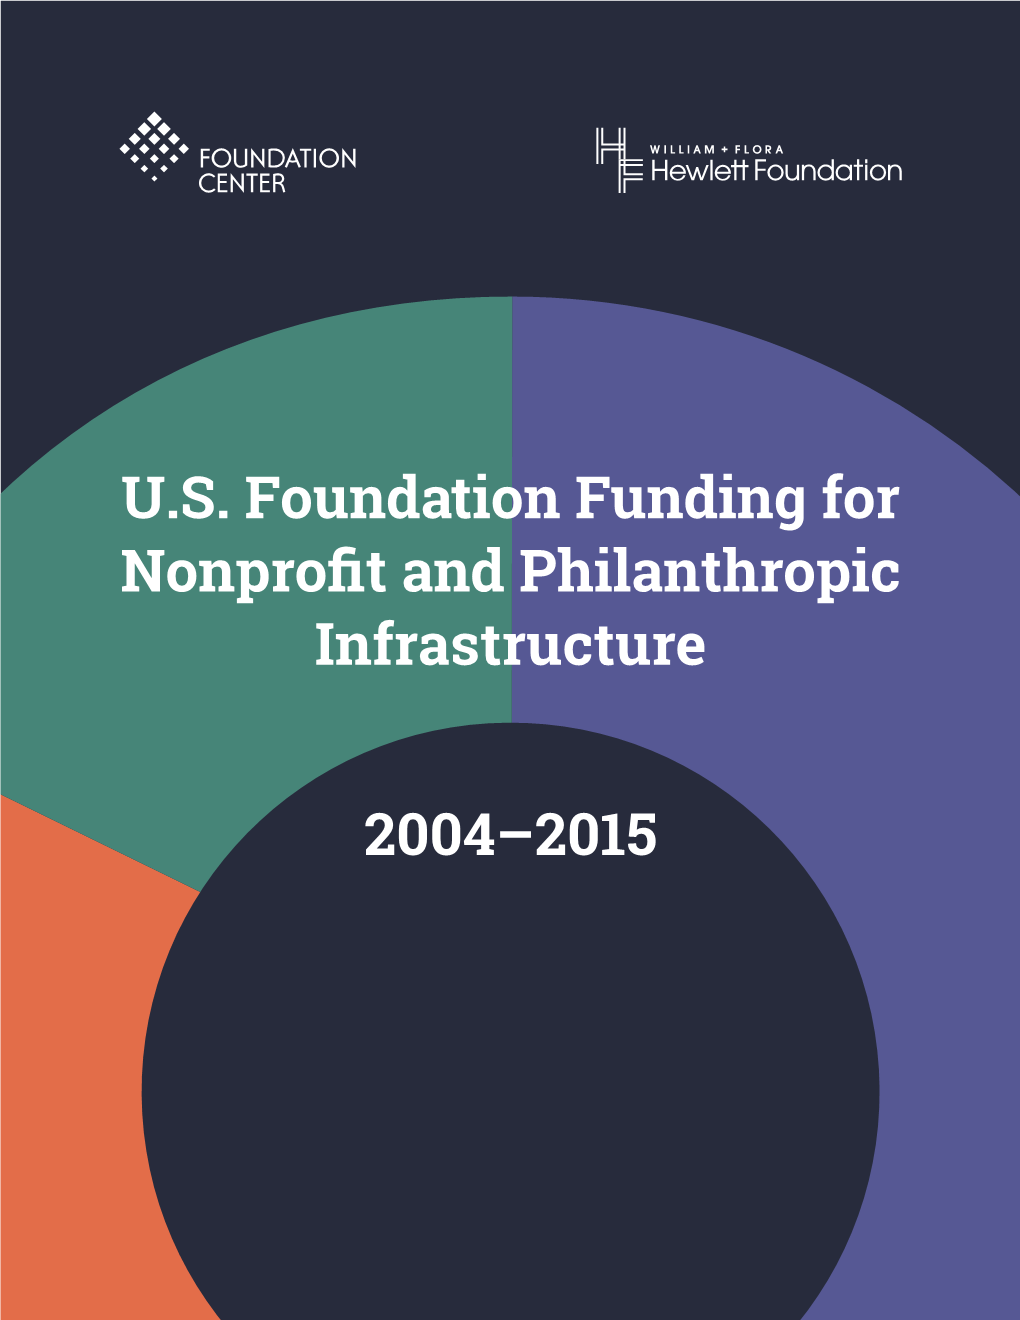 U.S. Foundation Funding for Nonprofit and Philanthropic Infrastructure